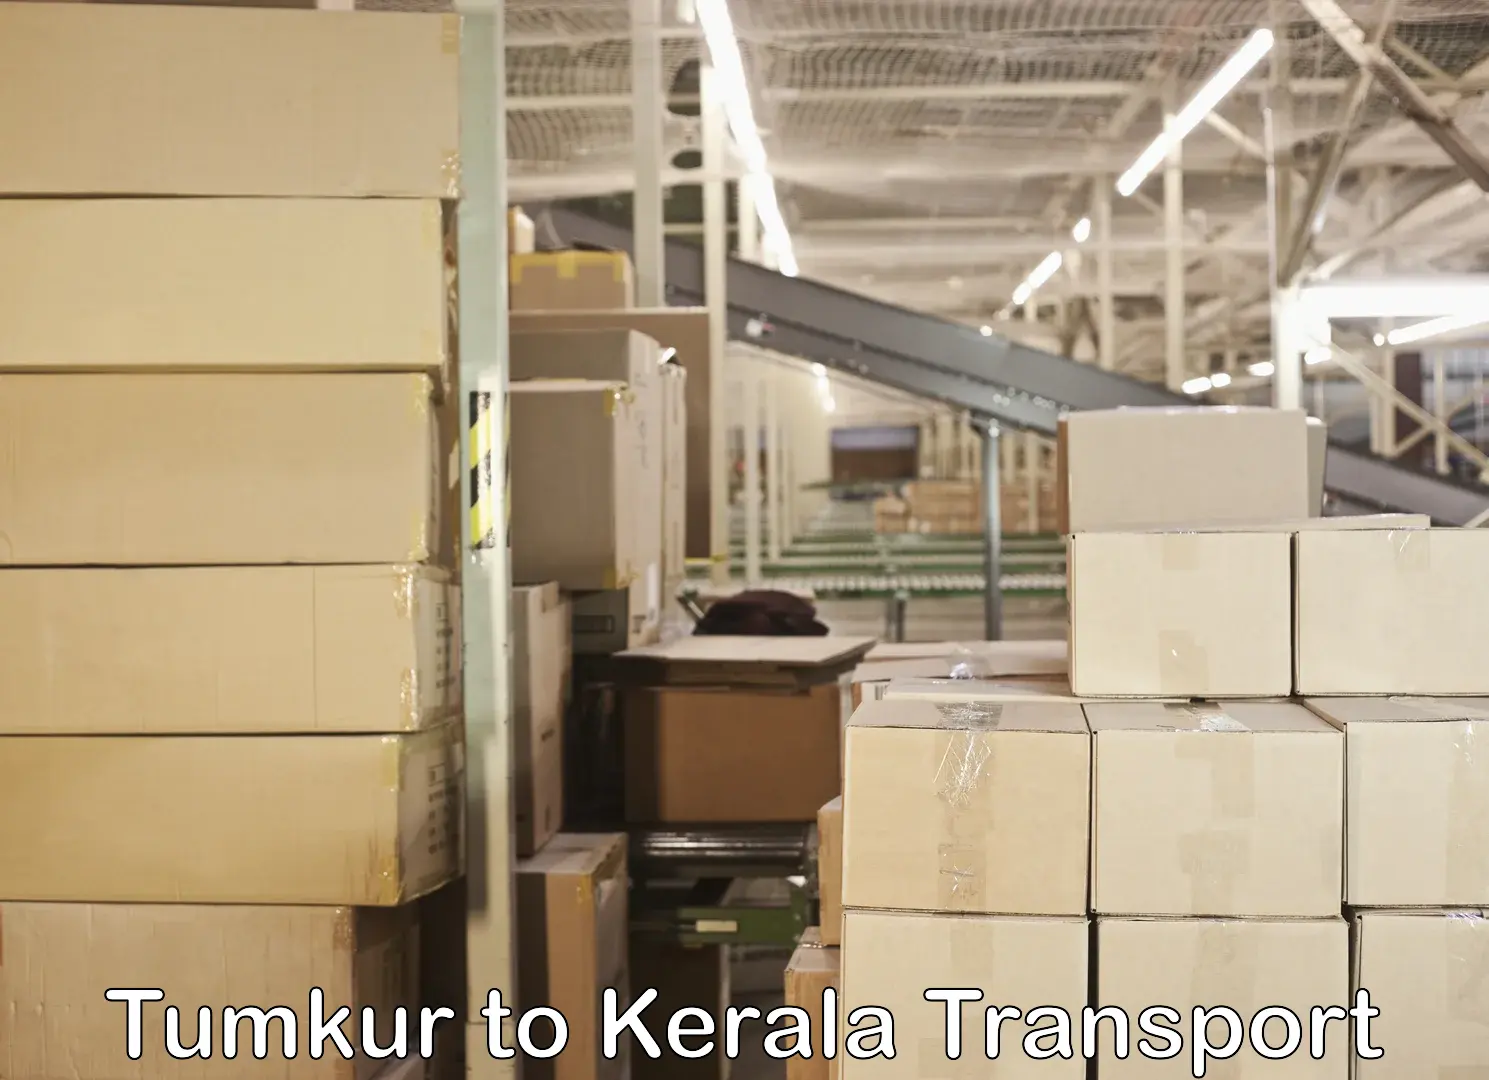 Road transport online services Tumkur to Kerala